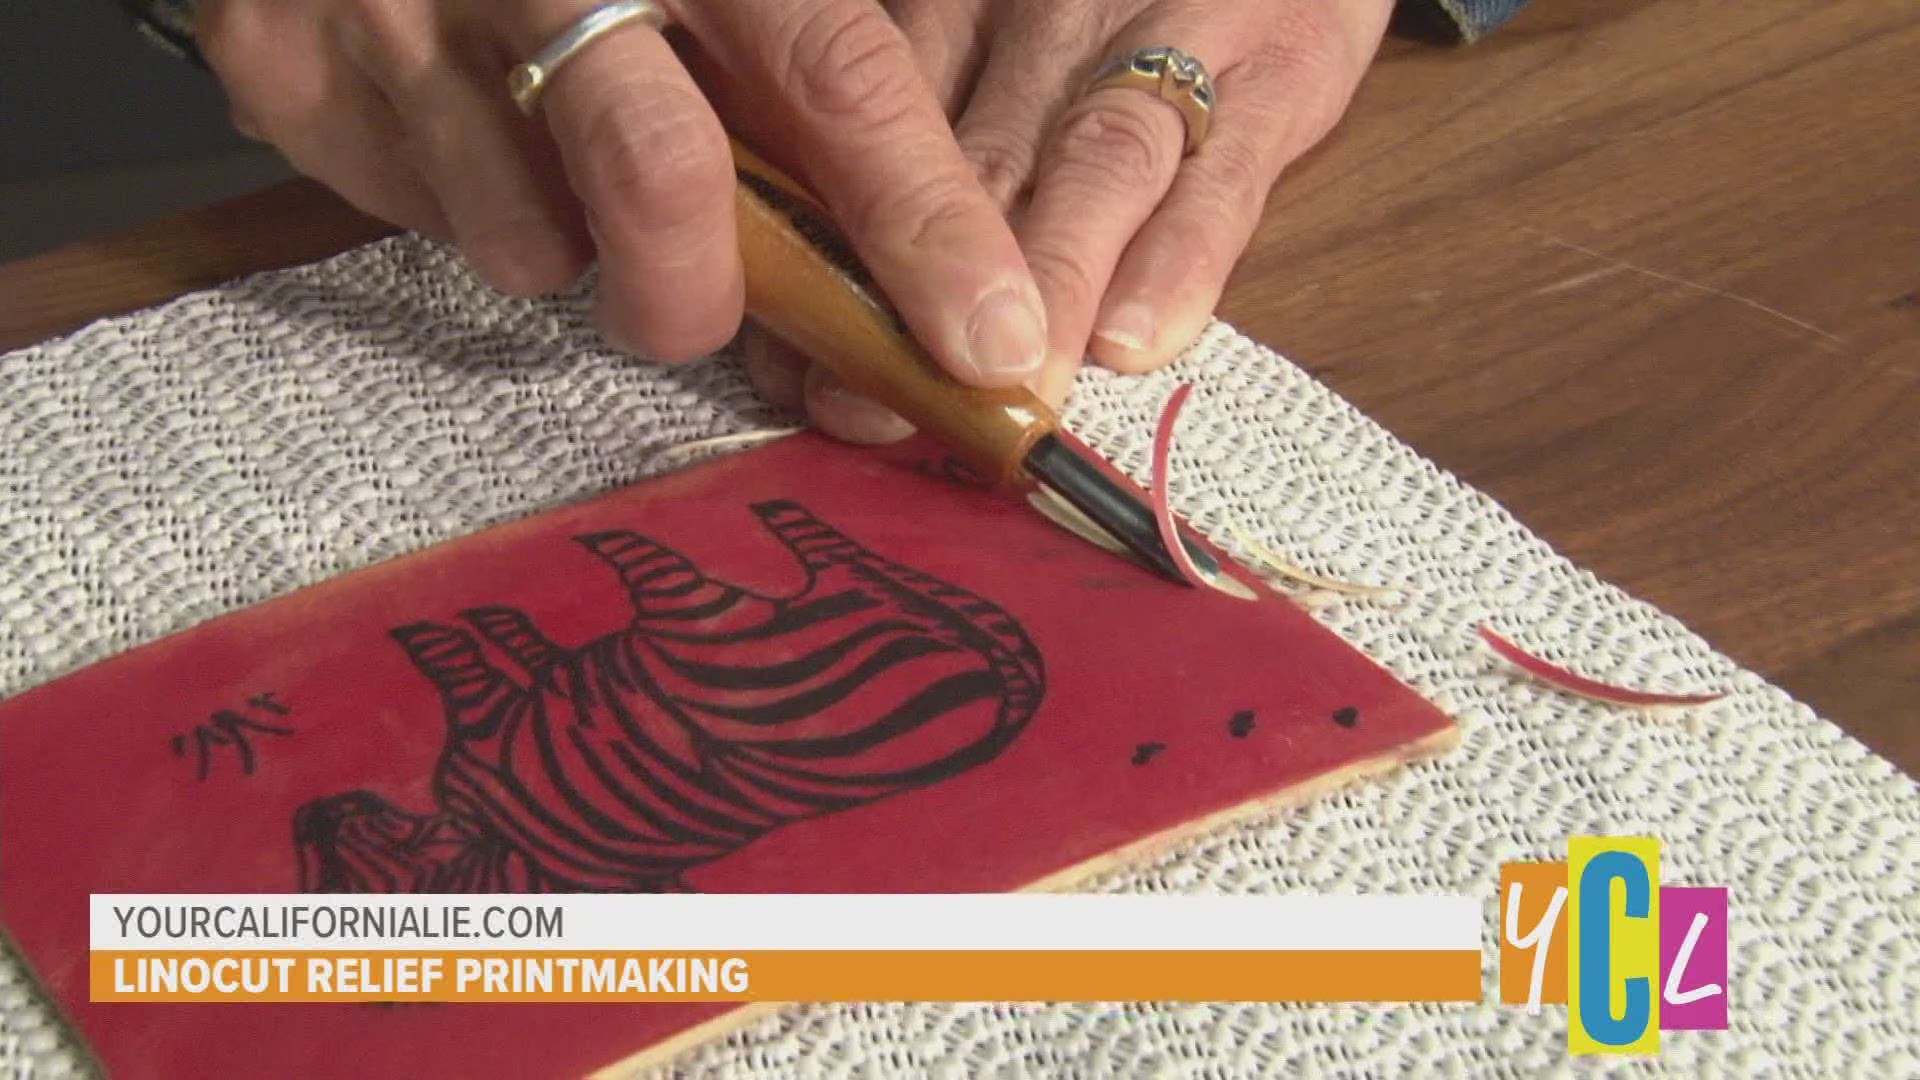 Linocut Relief Printmaking - Verge Center for the Arts